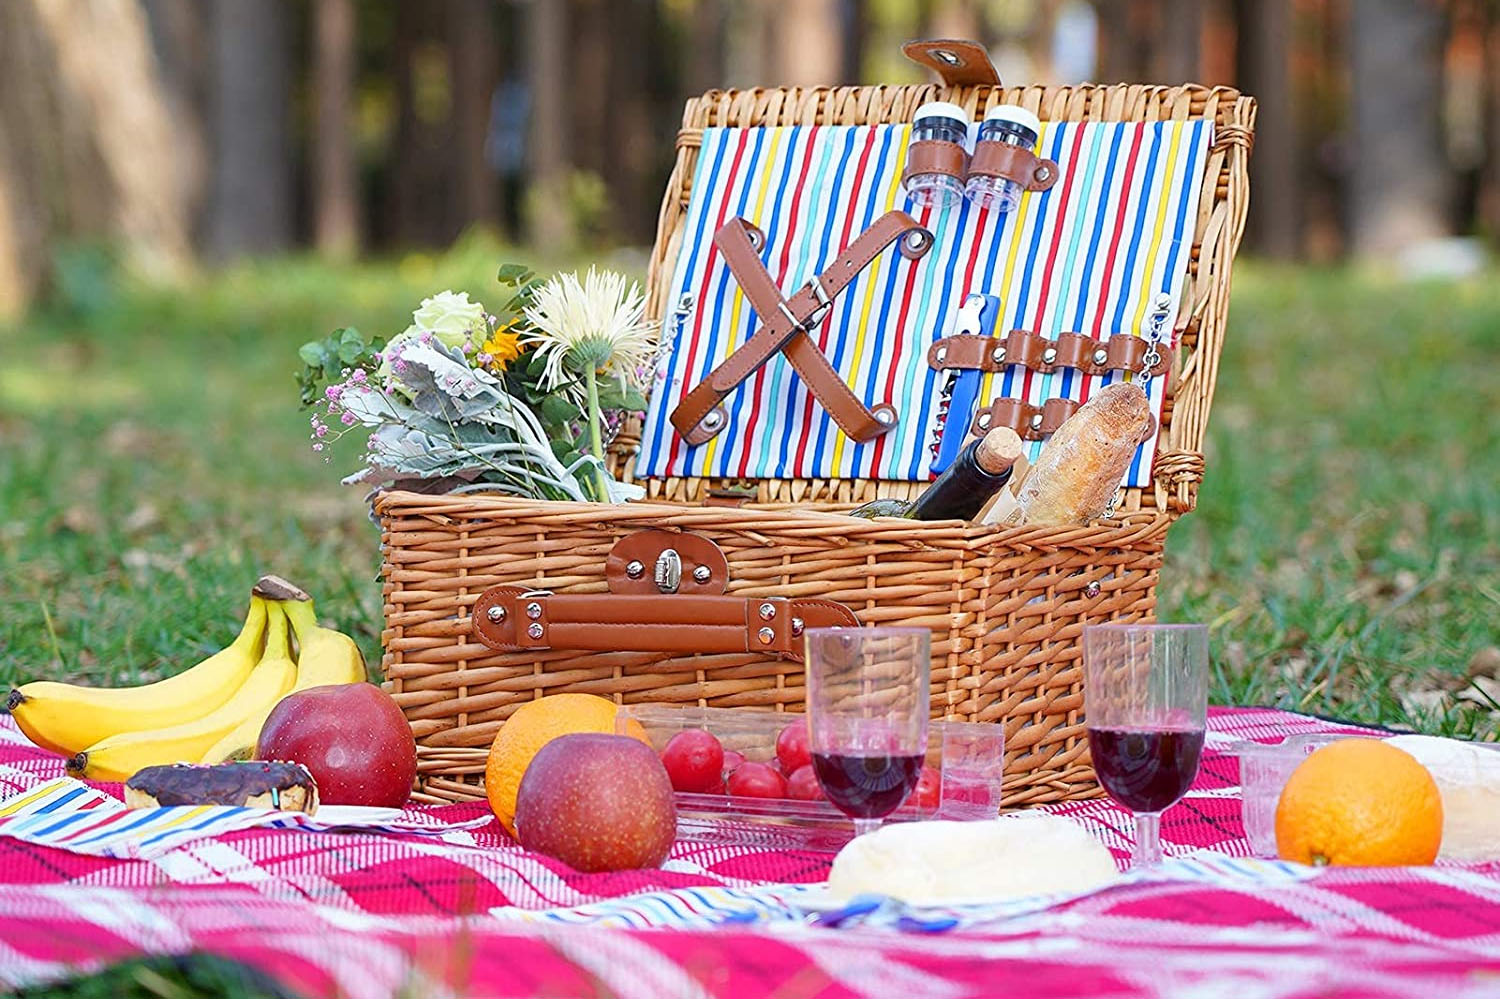 Picnic every Sunday in June, July to August 28th